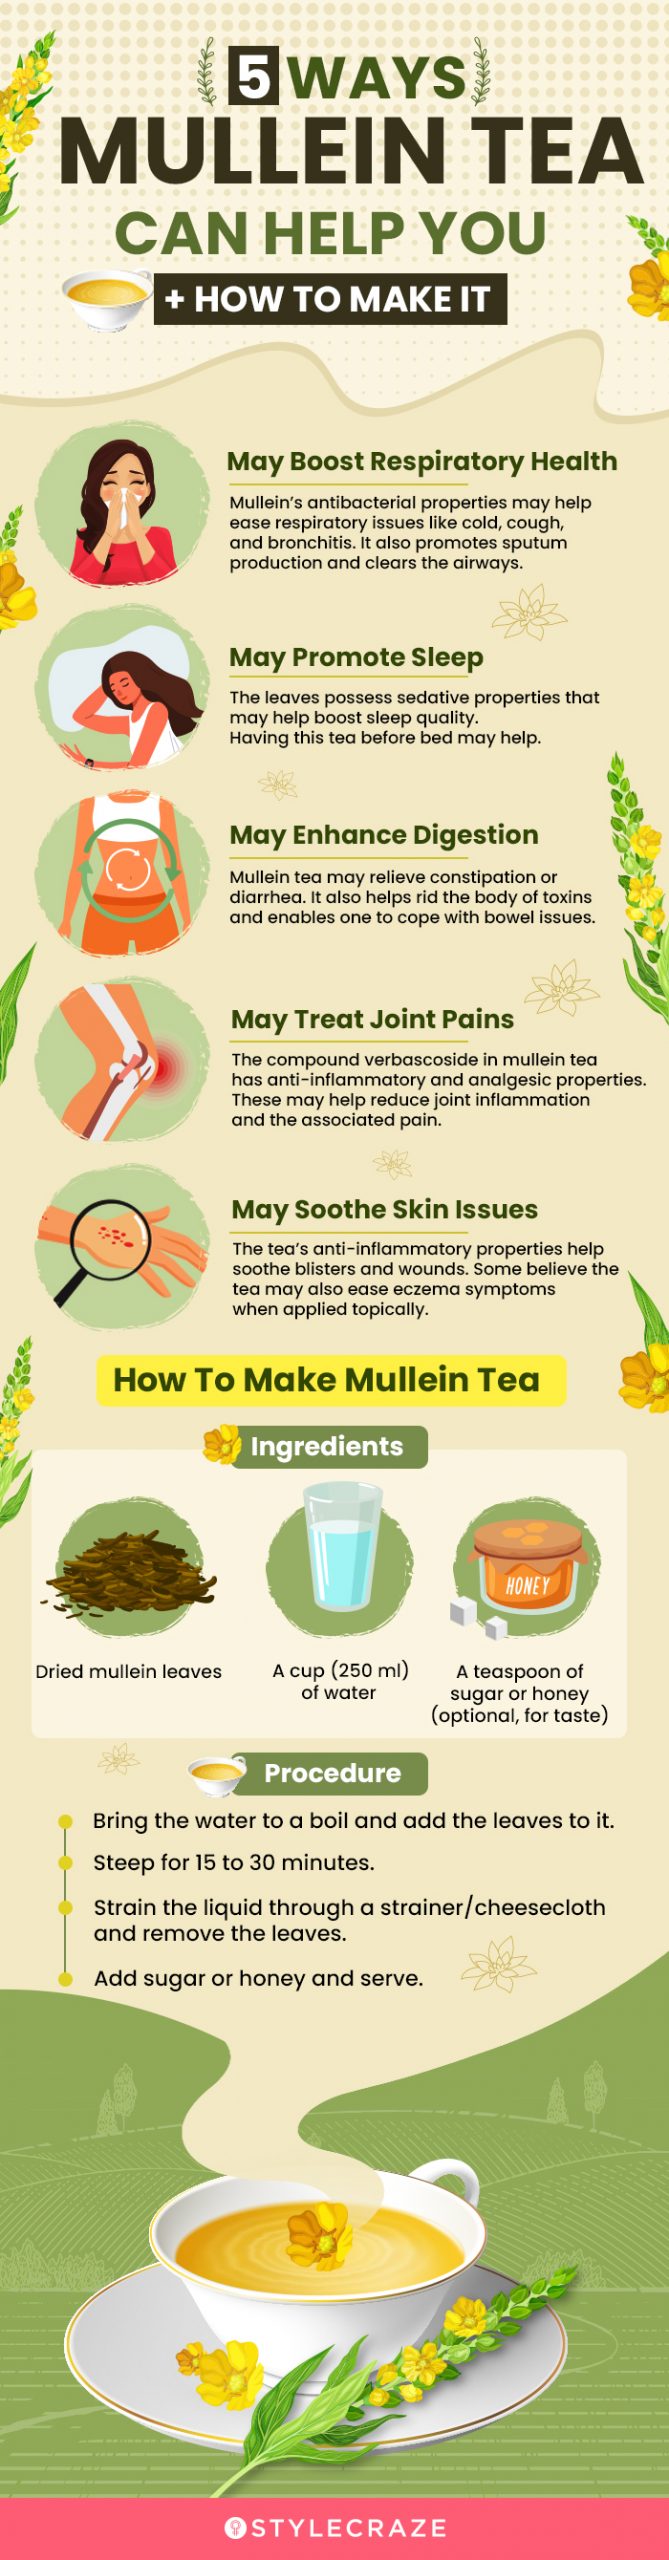 5 important mullein tea benefits how to make (infographic)